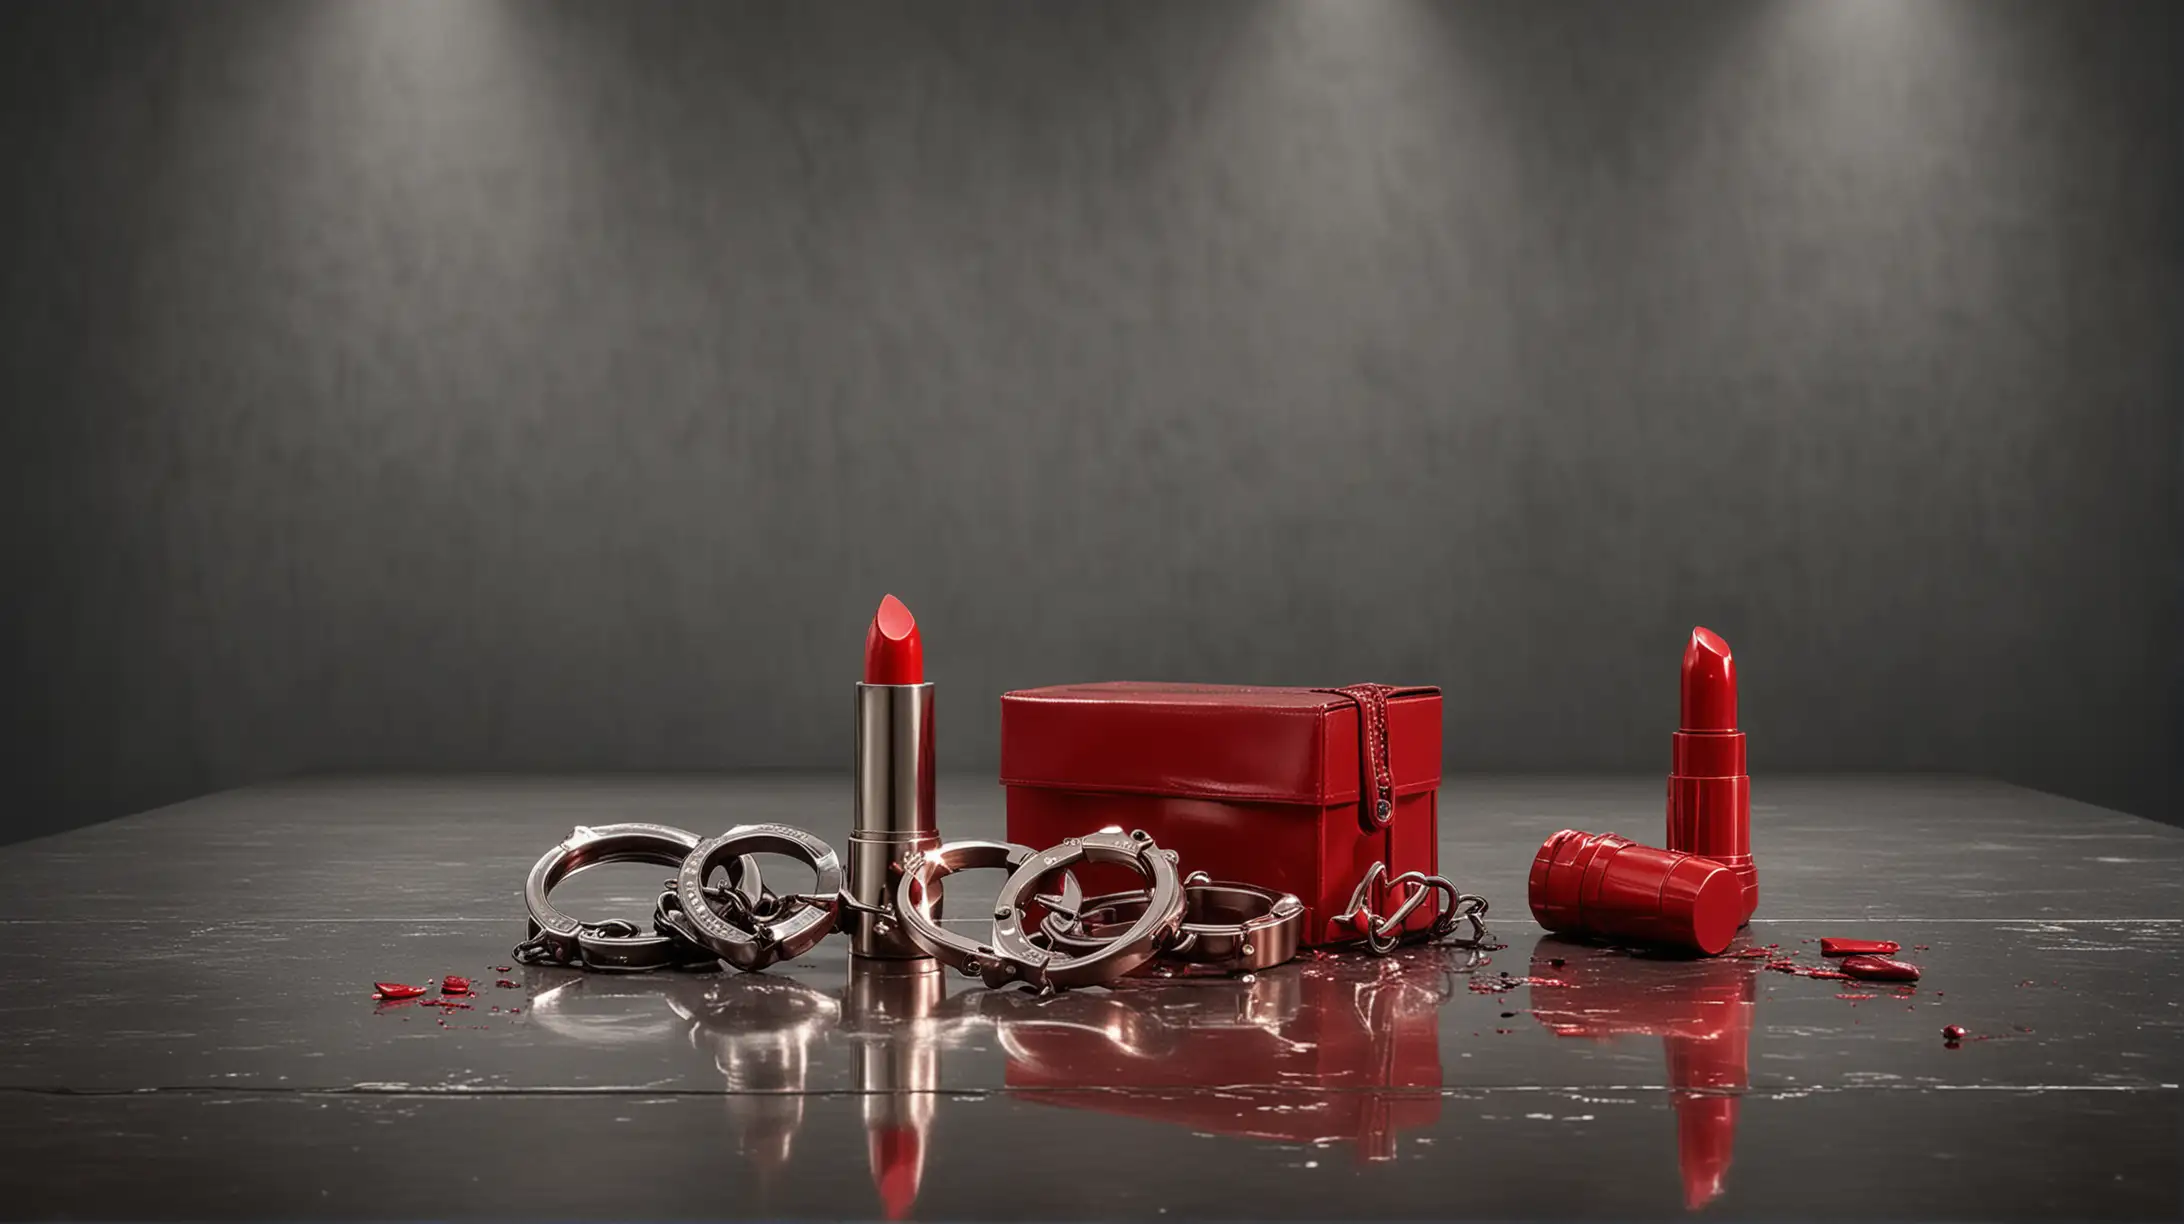 Create a compelling image prompt featuring metallic handcuffs and red lipstick products within a captivating and intense scene:

Subject Matter: Close-up view of metallic handcuffs and red lipstick products [1].
Setting: A dark room with moody lighting to enhance the dramatic atmosphere.
Lighting: Utilize dramatic lighting to highlight the metallic finish of the handcuffs and glossy texture of the lipstick.
Color Scheme: Red tones dominate the scene, adding intensity and luxury to the composition.
Details: Emphasize detailed textures on the metallic surfaces and lipstick packaging [3], [5], [6].
Arrangement: Scatter red lipstick products on the floor and table to create a dynamic visual narrative.
Mood: Convey professionalism and excitement with a touch of intrigue, appealing to high-quality artistic interpretations.
This image prompt aims to inspire AI-generated artwork that captures the essence of luxury and intensity in an unconventional setting.